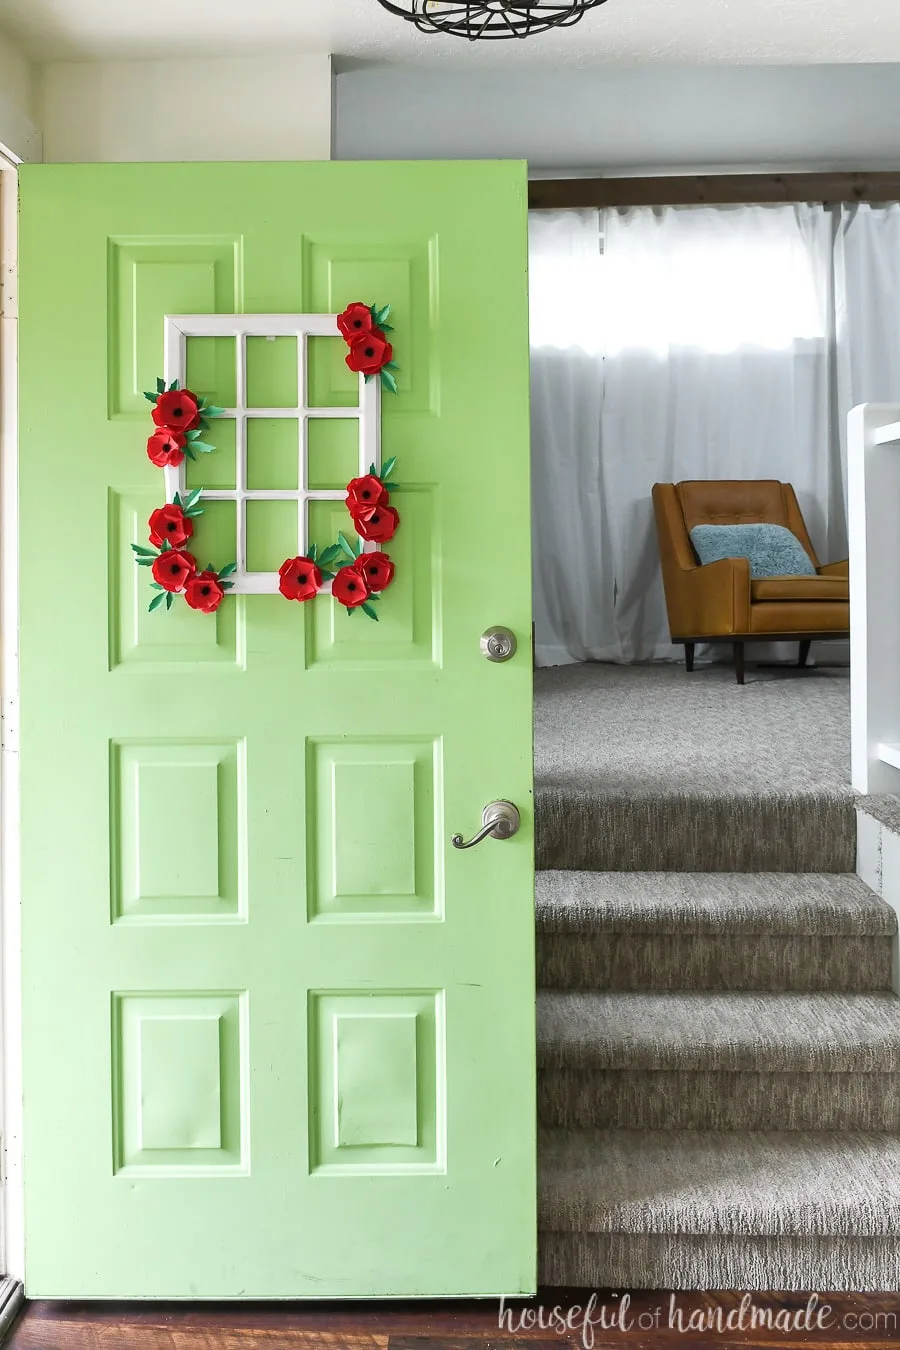 Green door with window frame wreath on it, decorated with paper poppy flowers, opening up to the house.